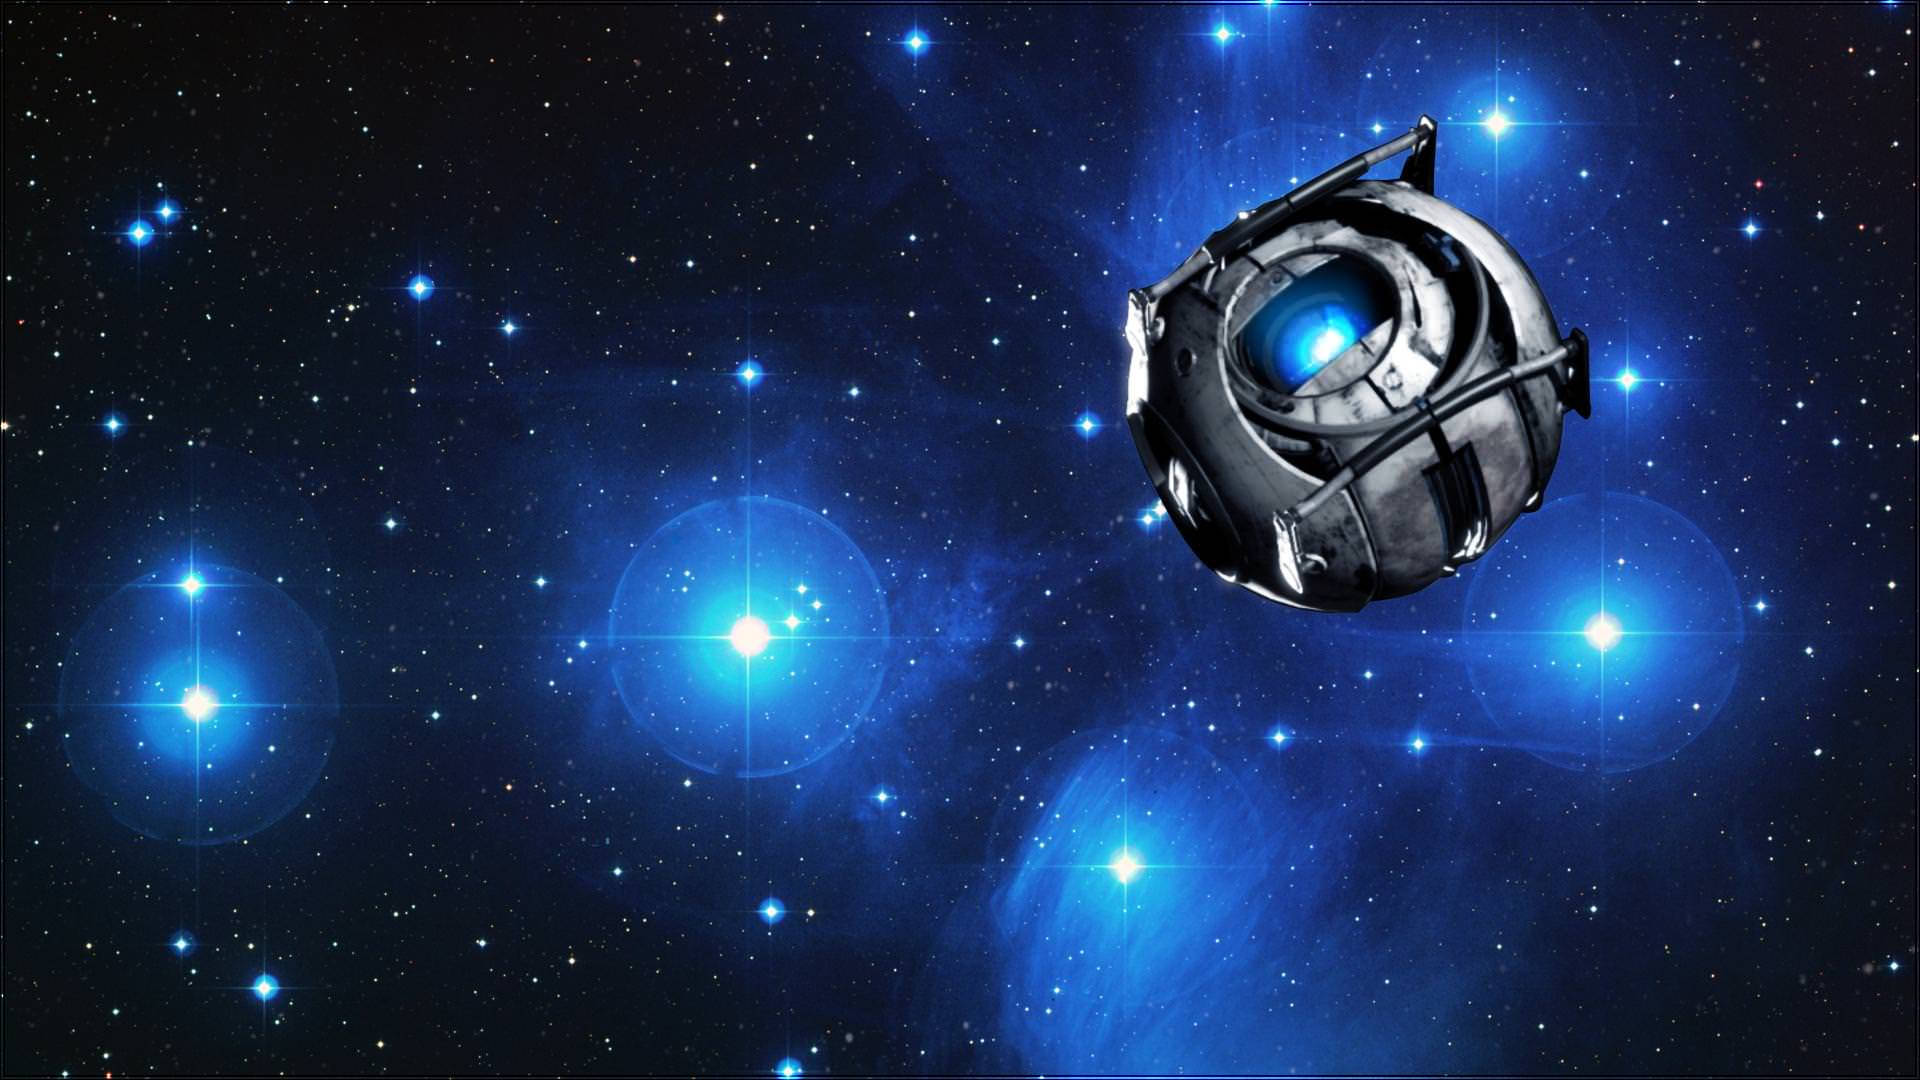 A Spaceship In The Sky With Stars Wallpaper